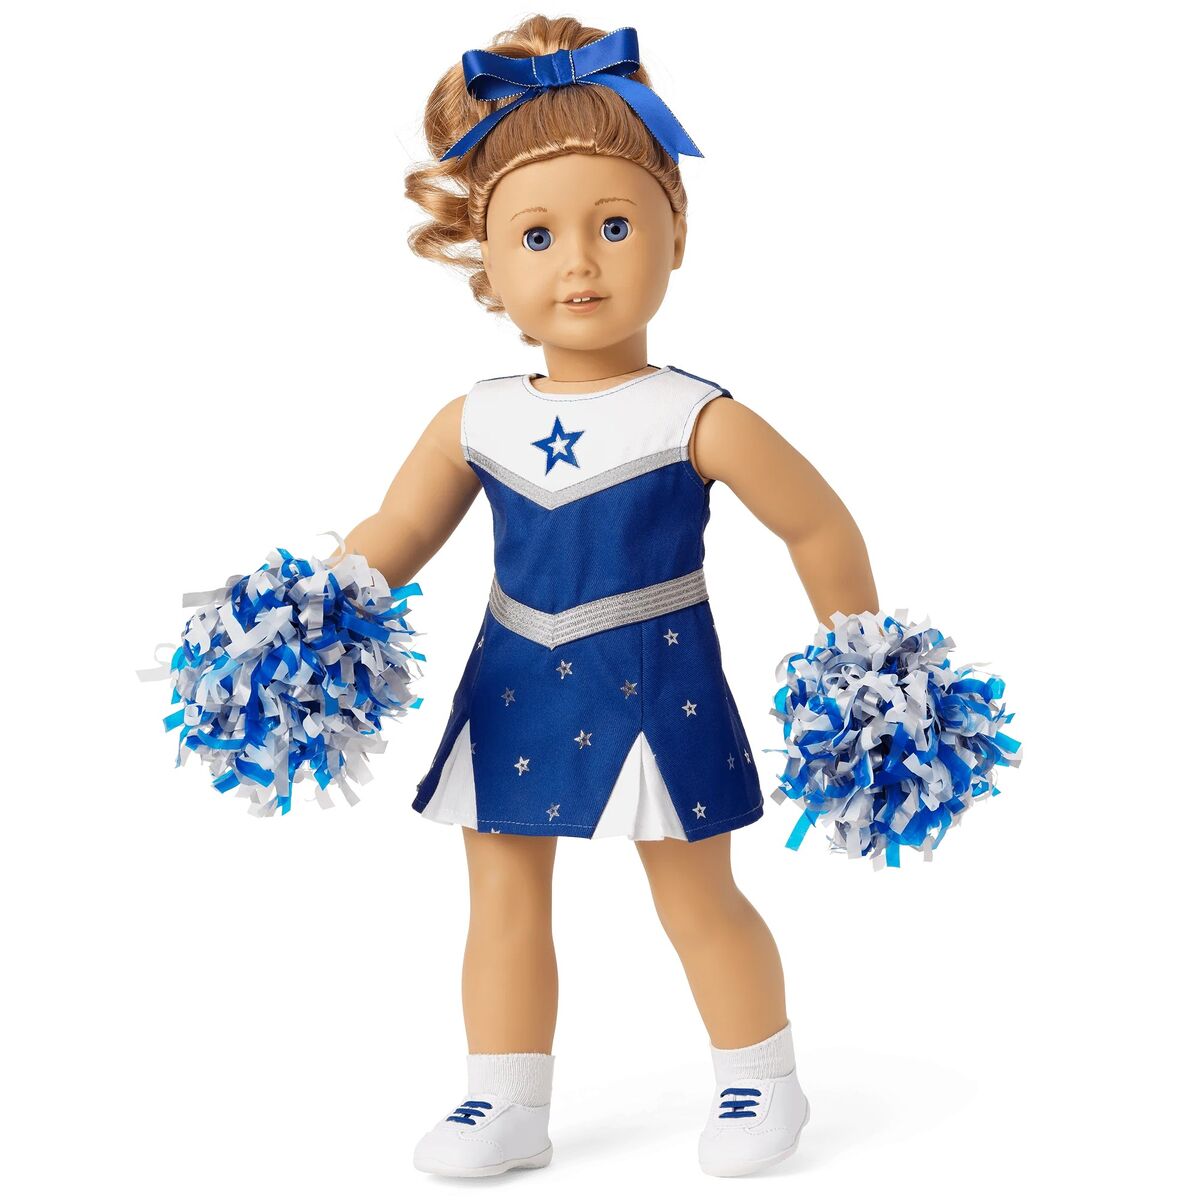 Doll Clothes 18 Blue Cheerleader Outfit Fits American Girl Dolls 